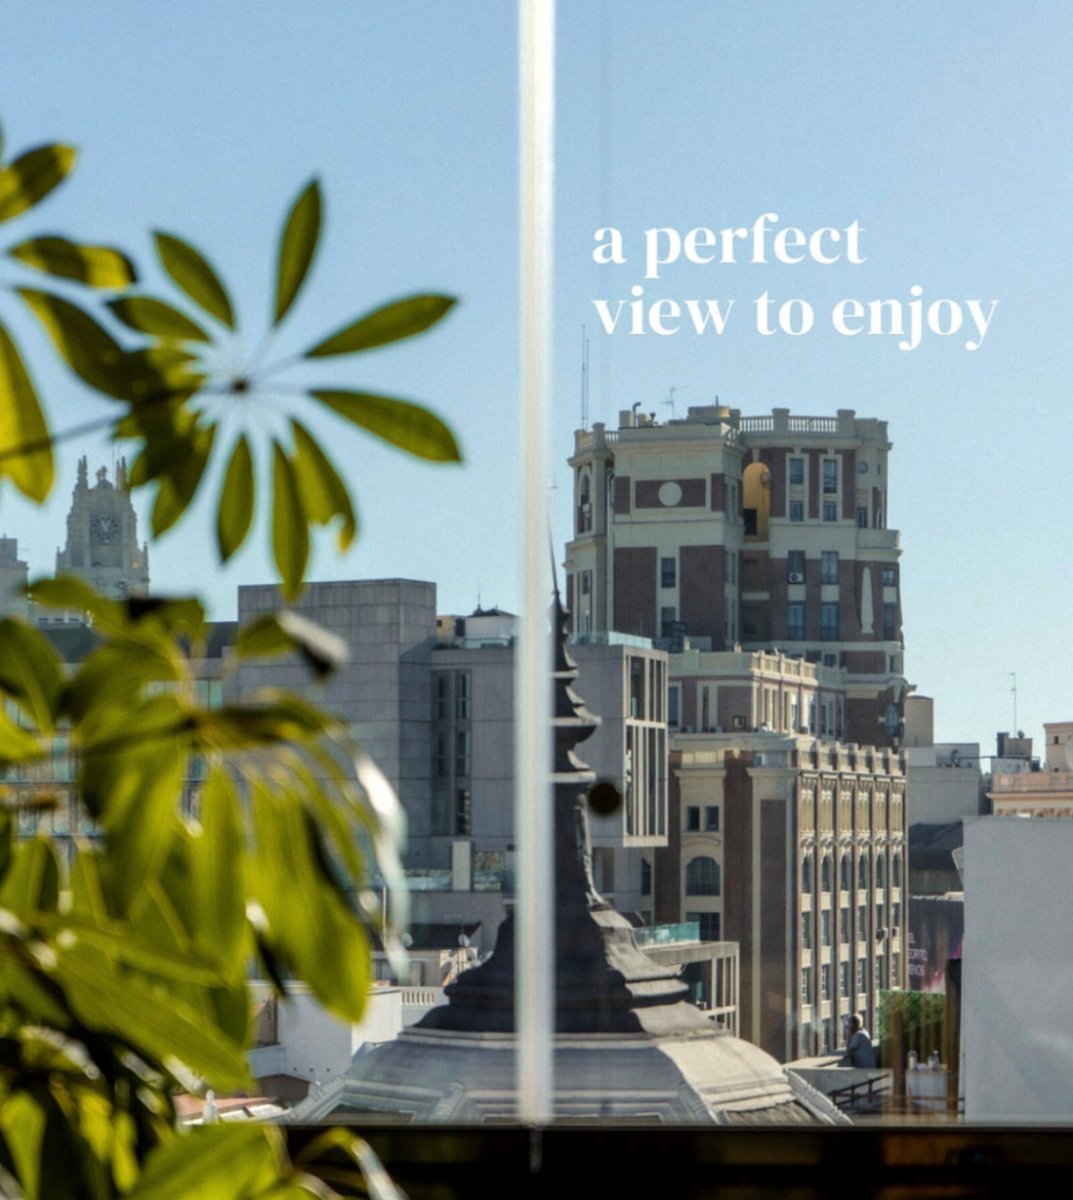 The best view come after enjoying a refreshing drink at our terrace.

#PalacioReal #MadridCulture #HotelEmperador #Madrid #HotelMadrid #GranVia #MadridView #HotelWithAView #MadridCentro #Terraza